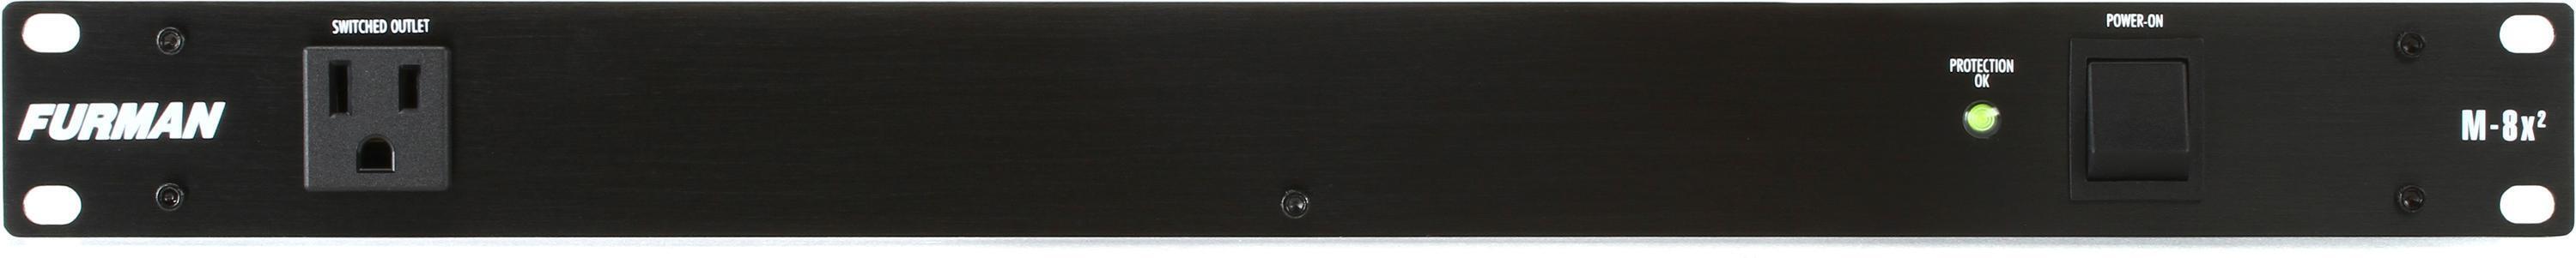 Furman M-8x2 8 Outlet Power Conditioner | Sweetwater